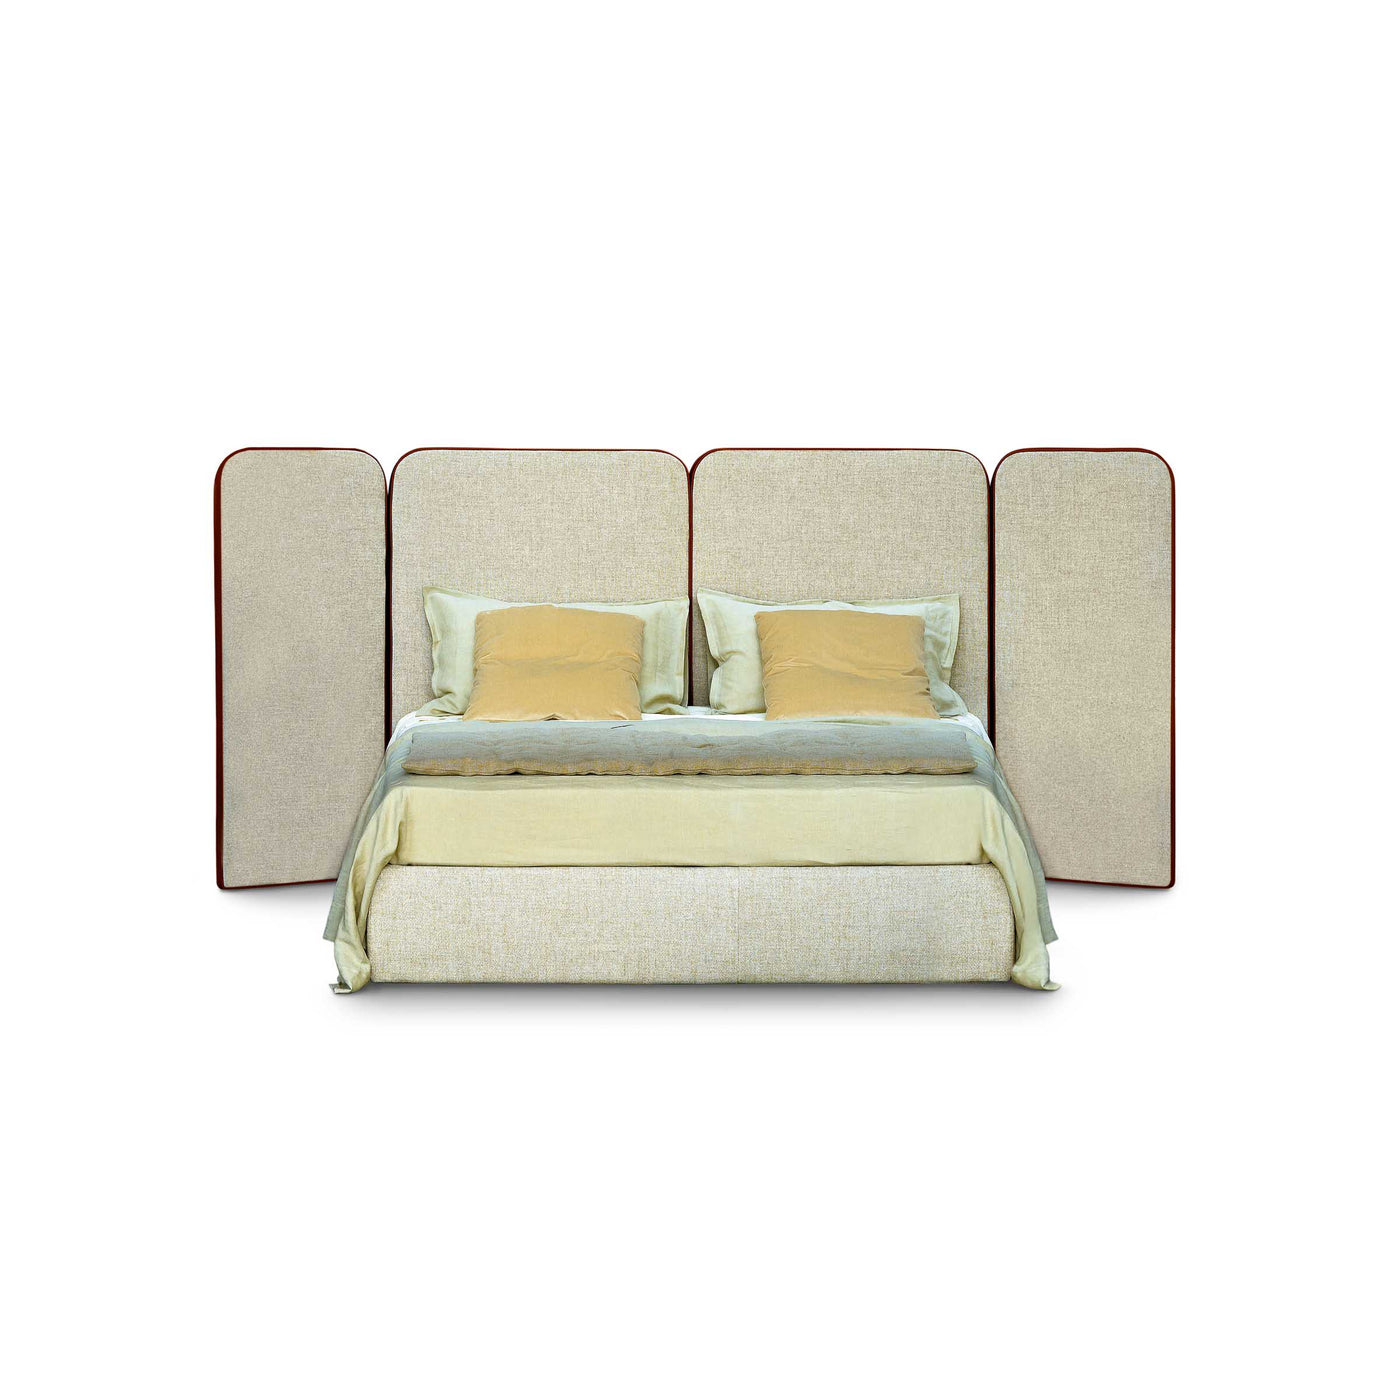 Bed PALAZZO by Bernhardt&Valle for Arflex 01